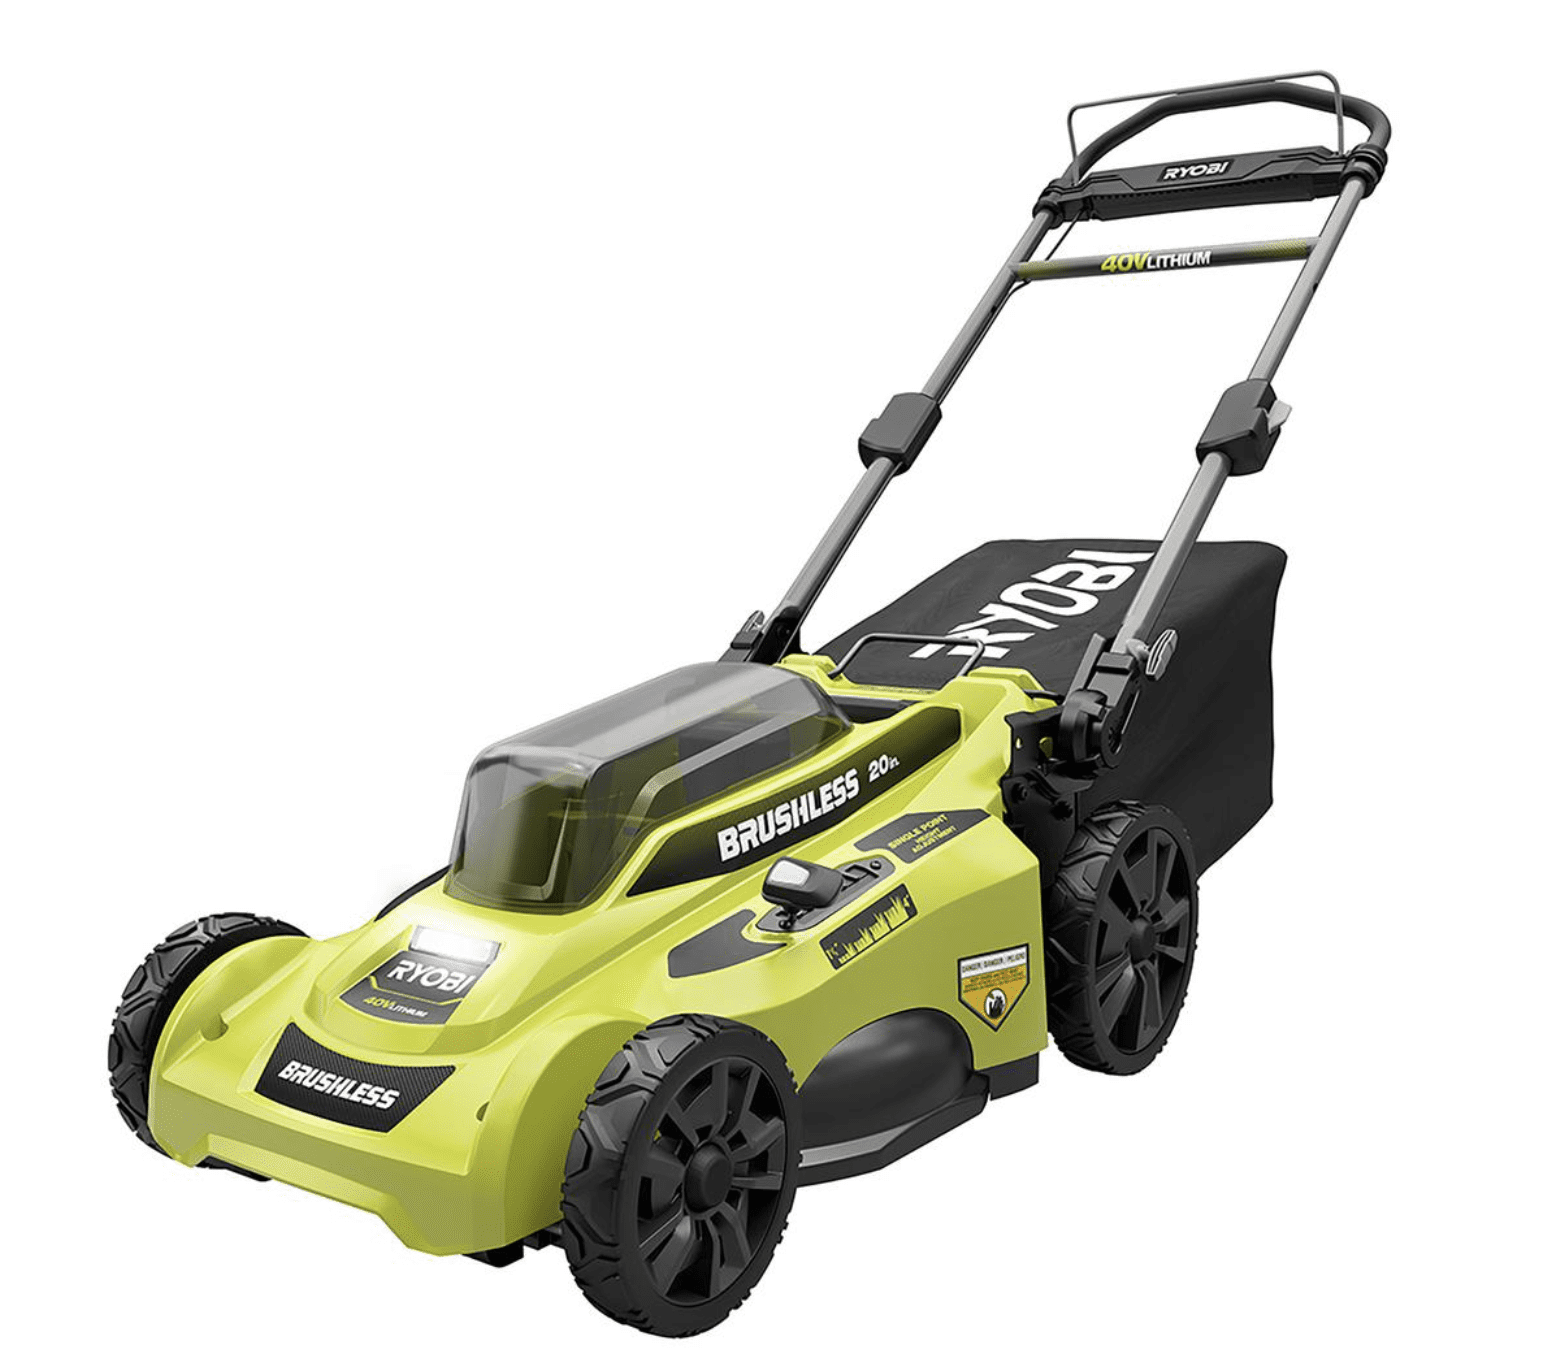 RY401110-Y for sale online Ryobi 40v Battery and Charger for Walk Behind Push Lawn Mower 